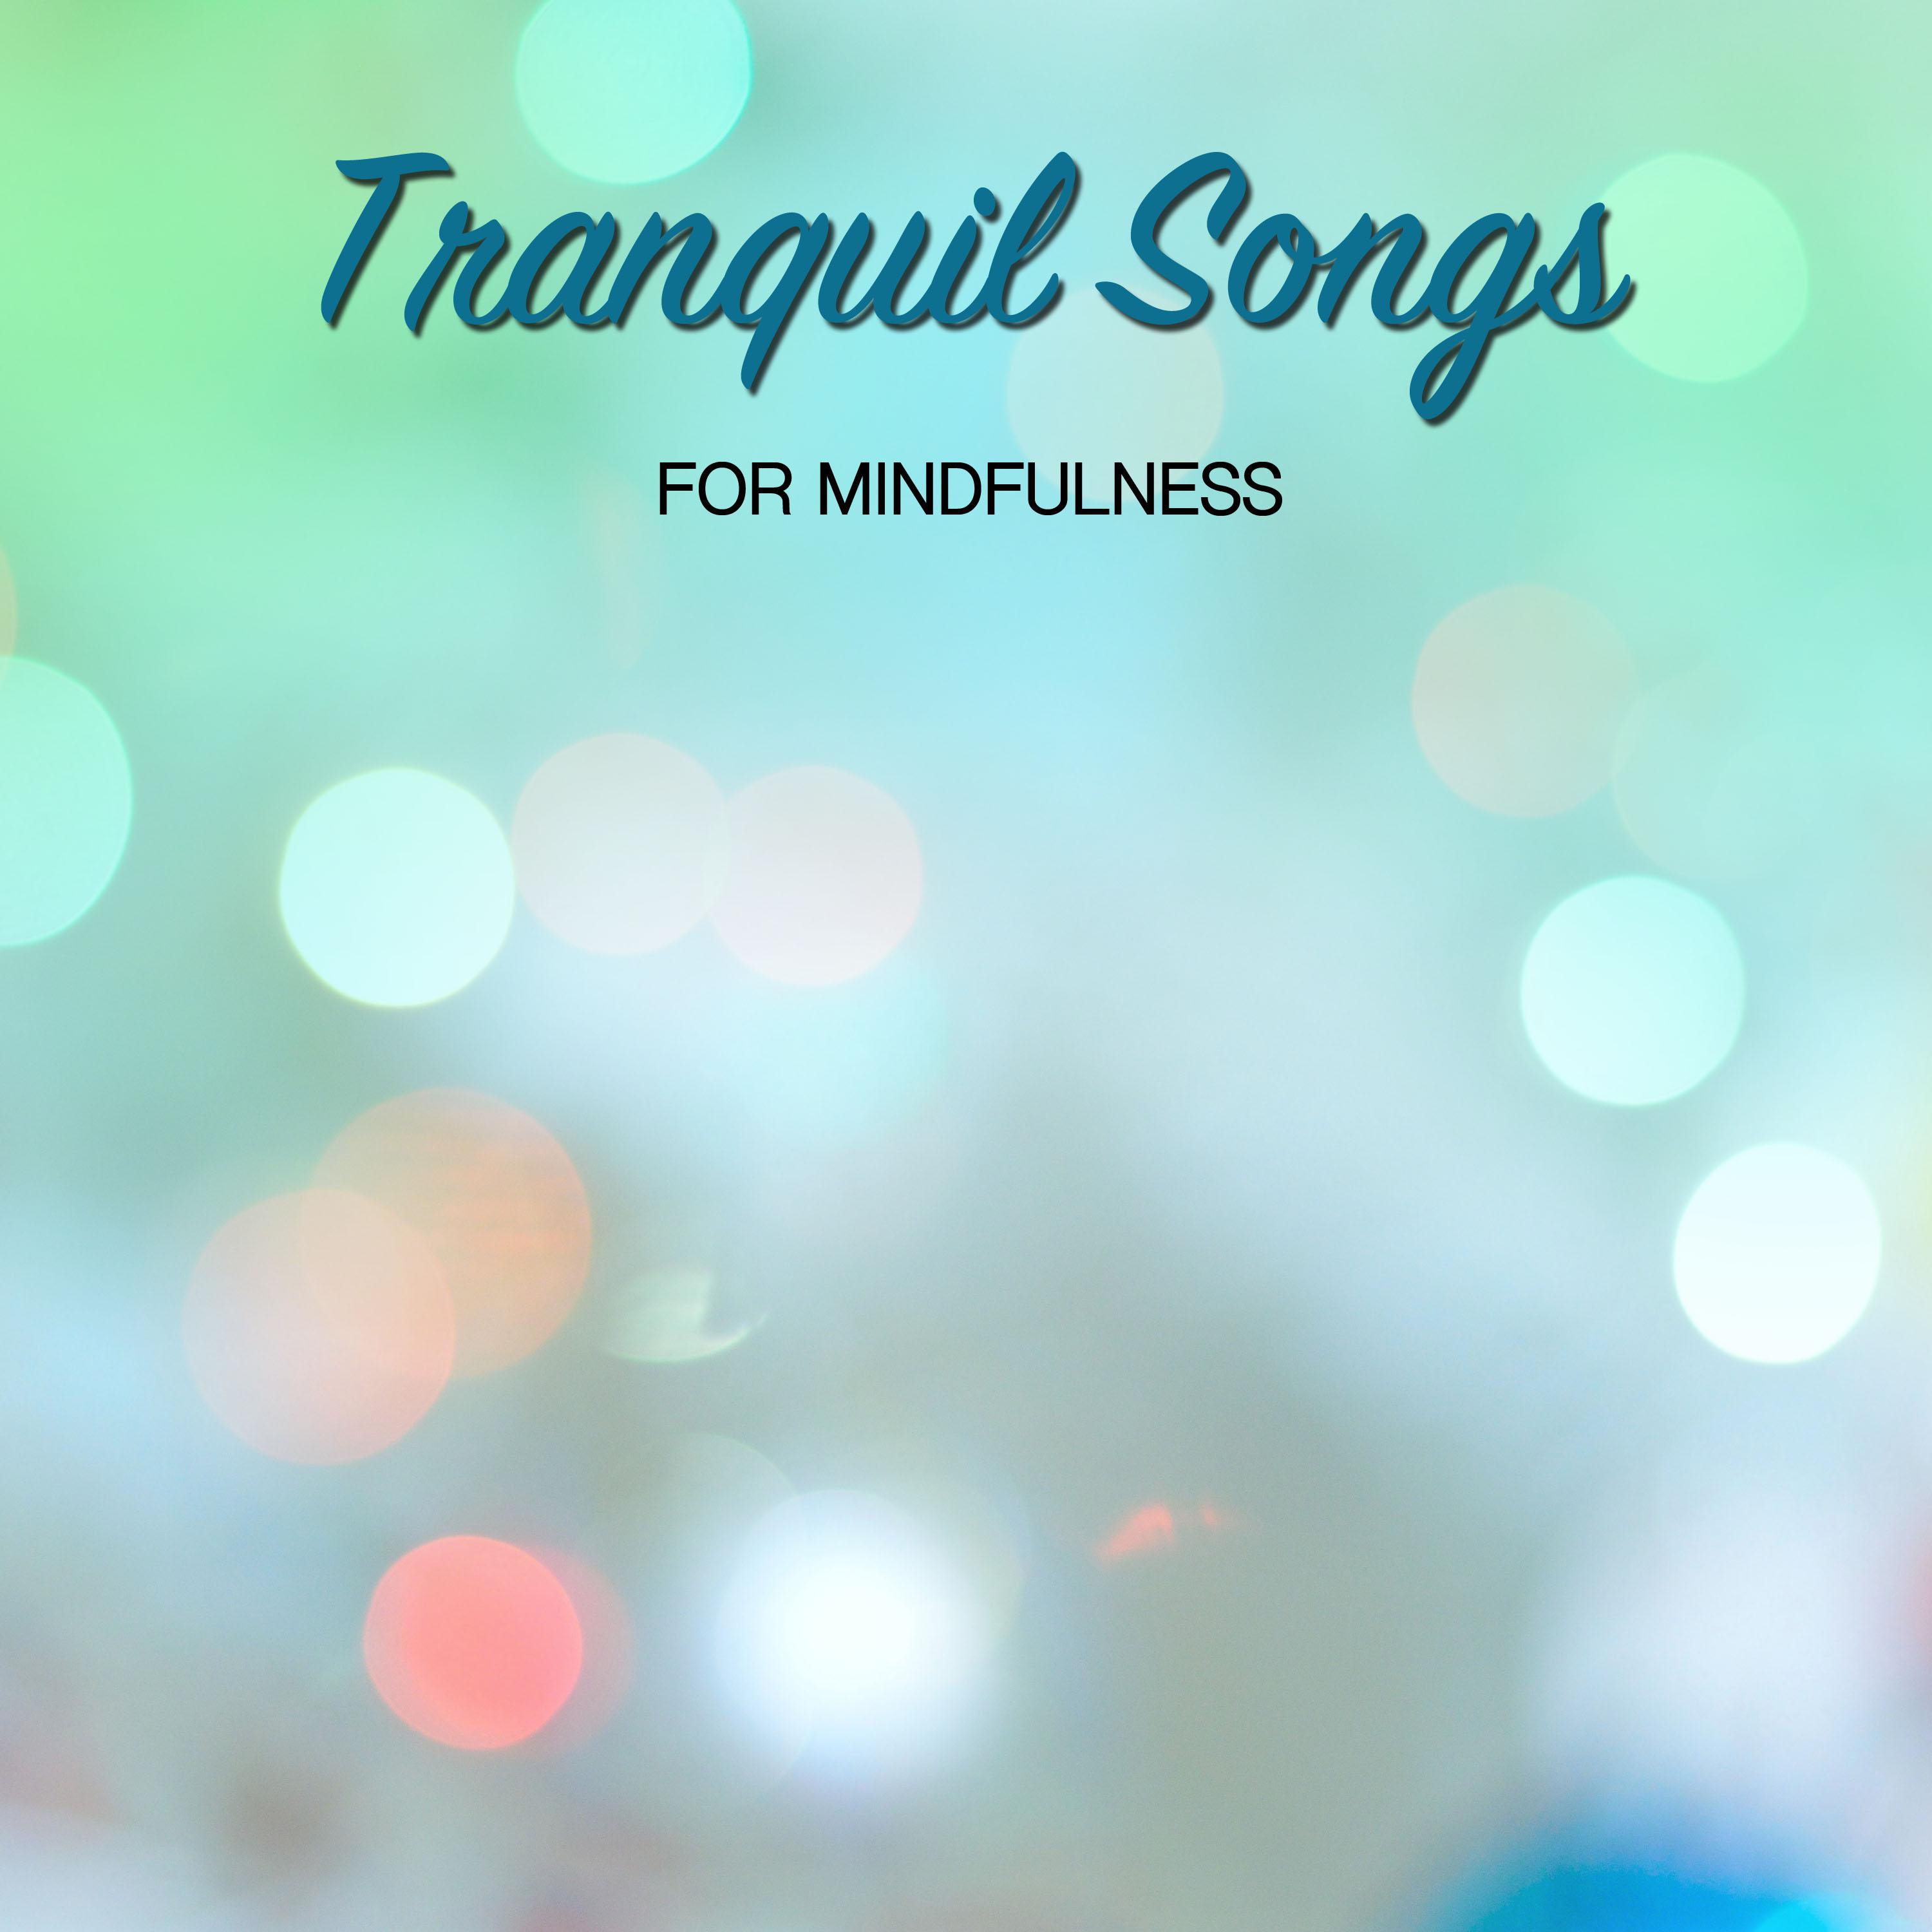 15 Tranquil Songs for Mindfulness